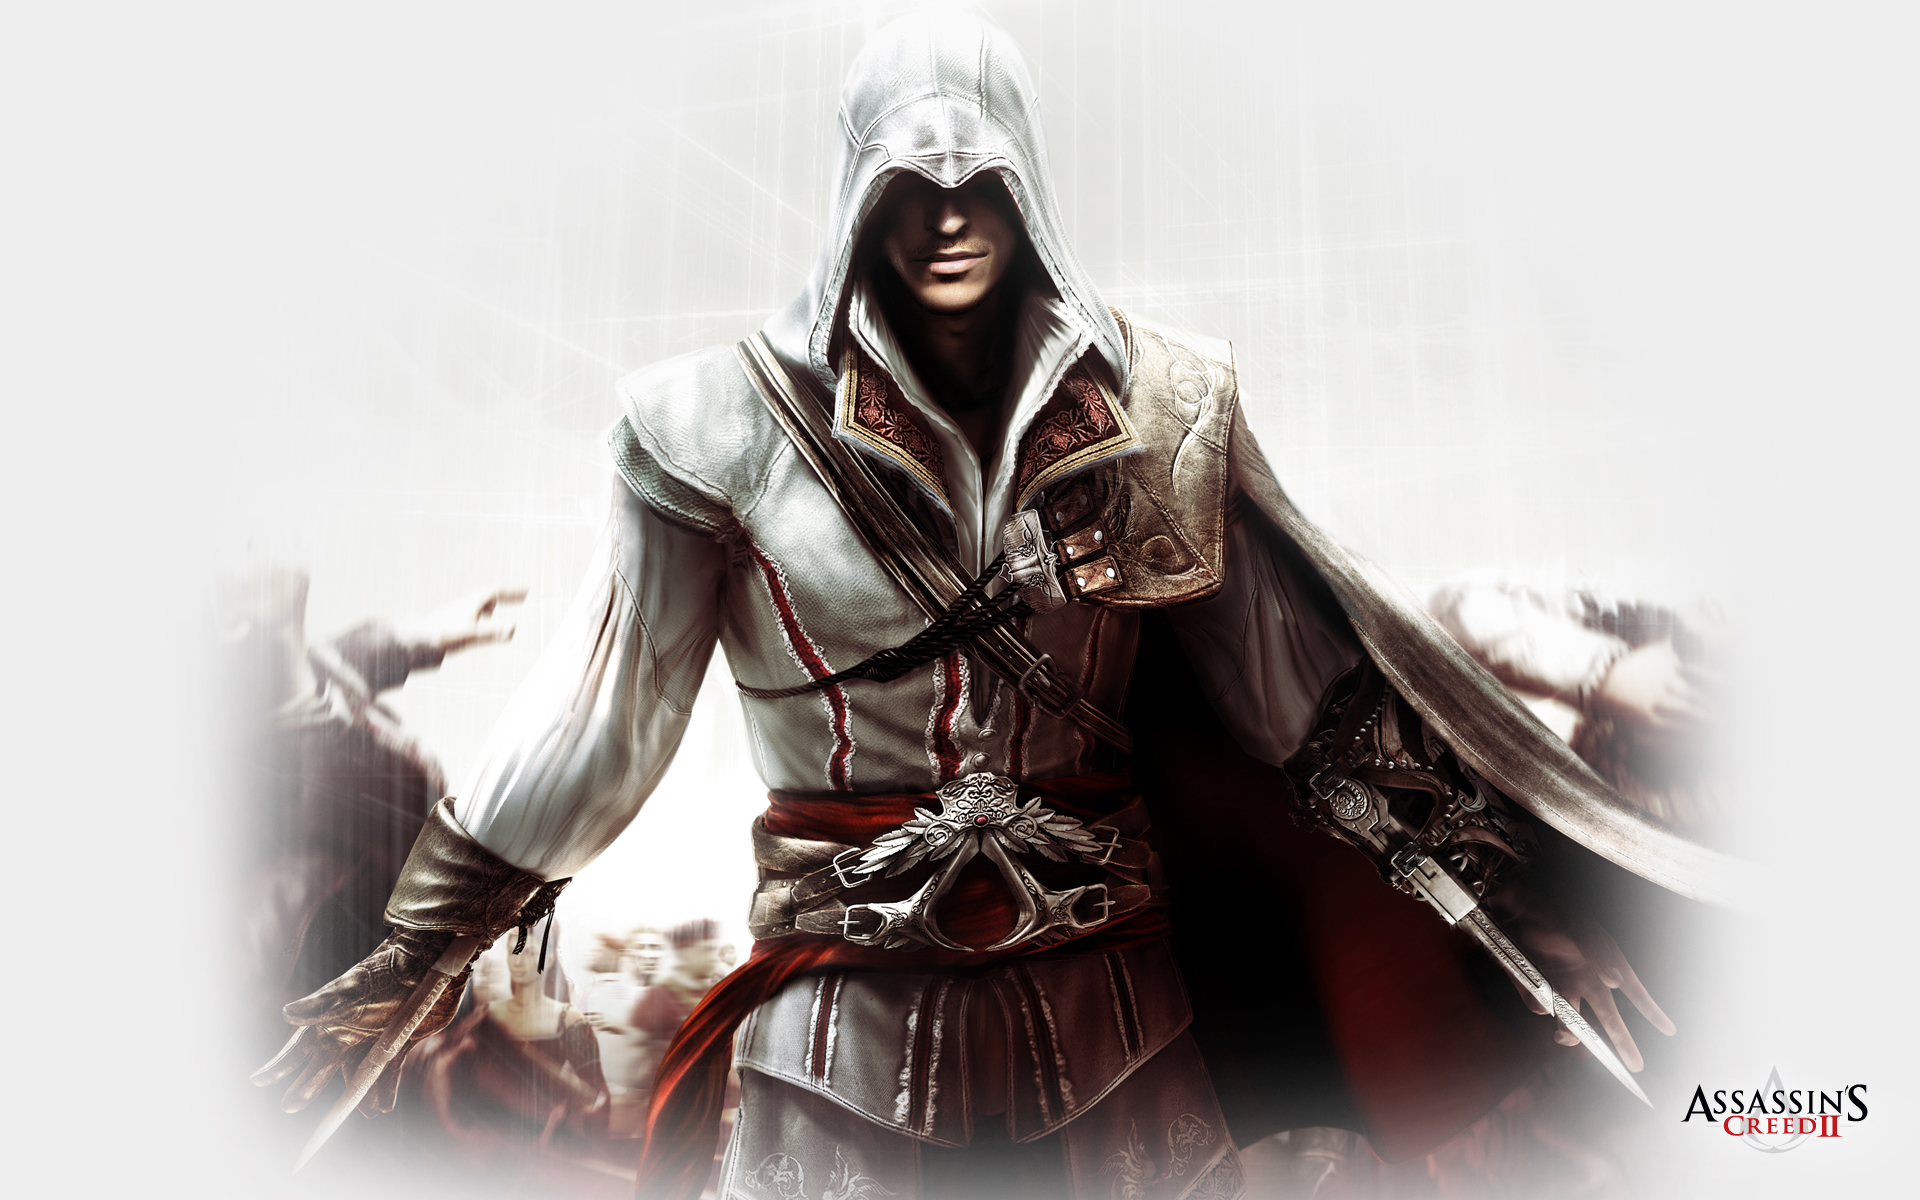 Ezio Auditore da Firenze (Assassin's Creed II). He was cute as hell in Assassin's Creed II, and a sexy beast in Brotherhood. Nobody cares for him when he got wrinkly in Revelations xD